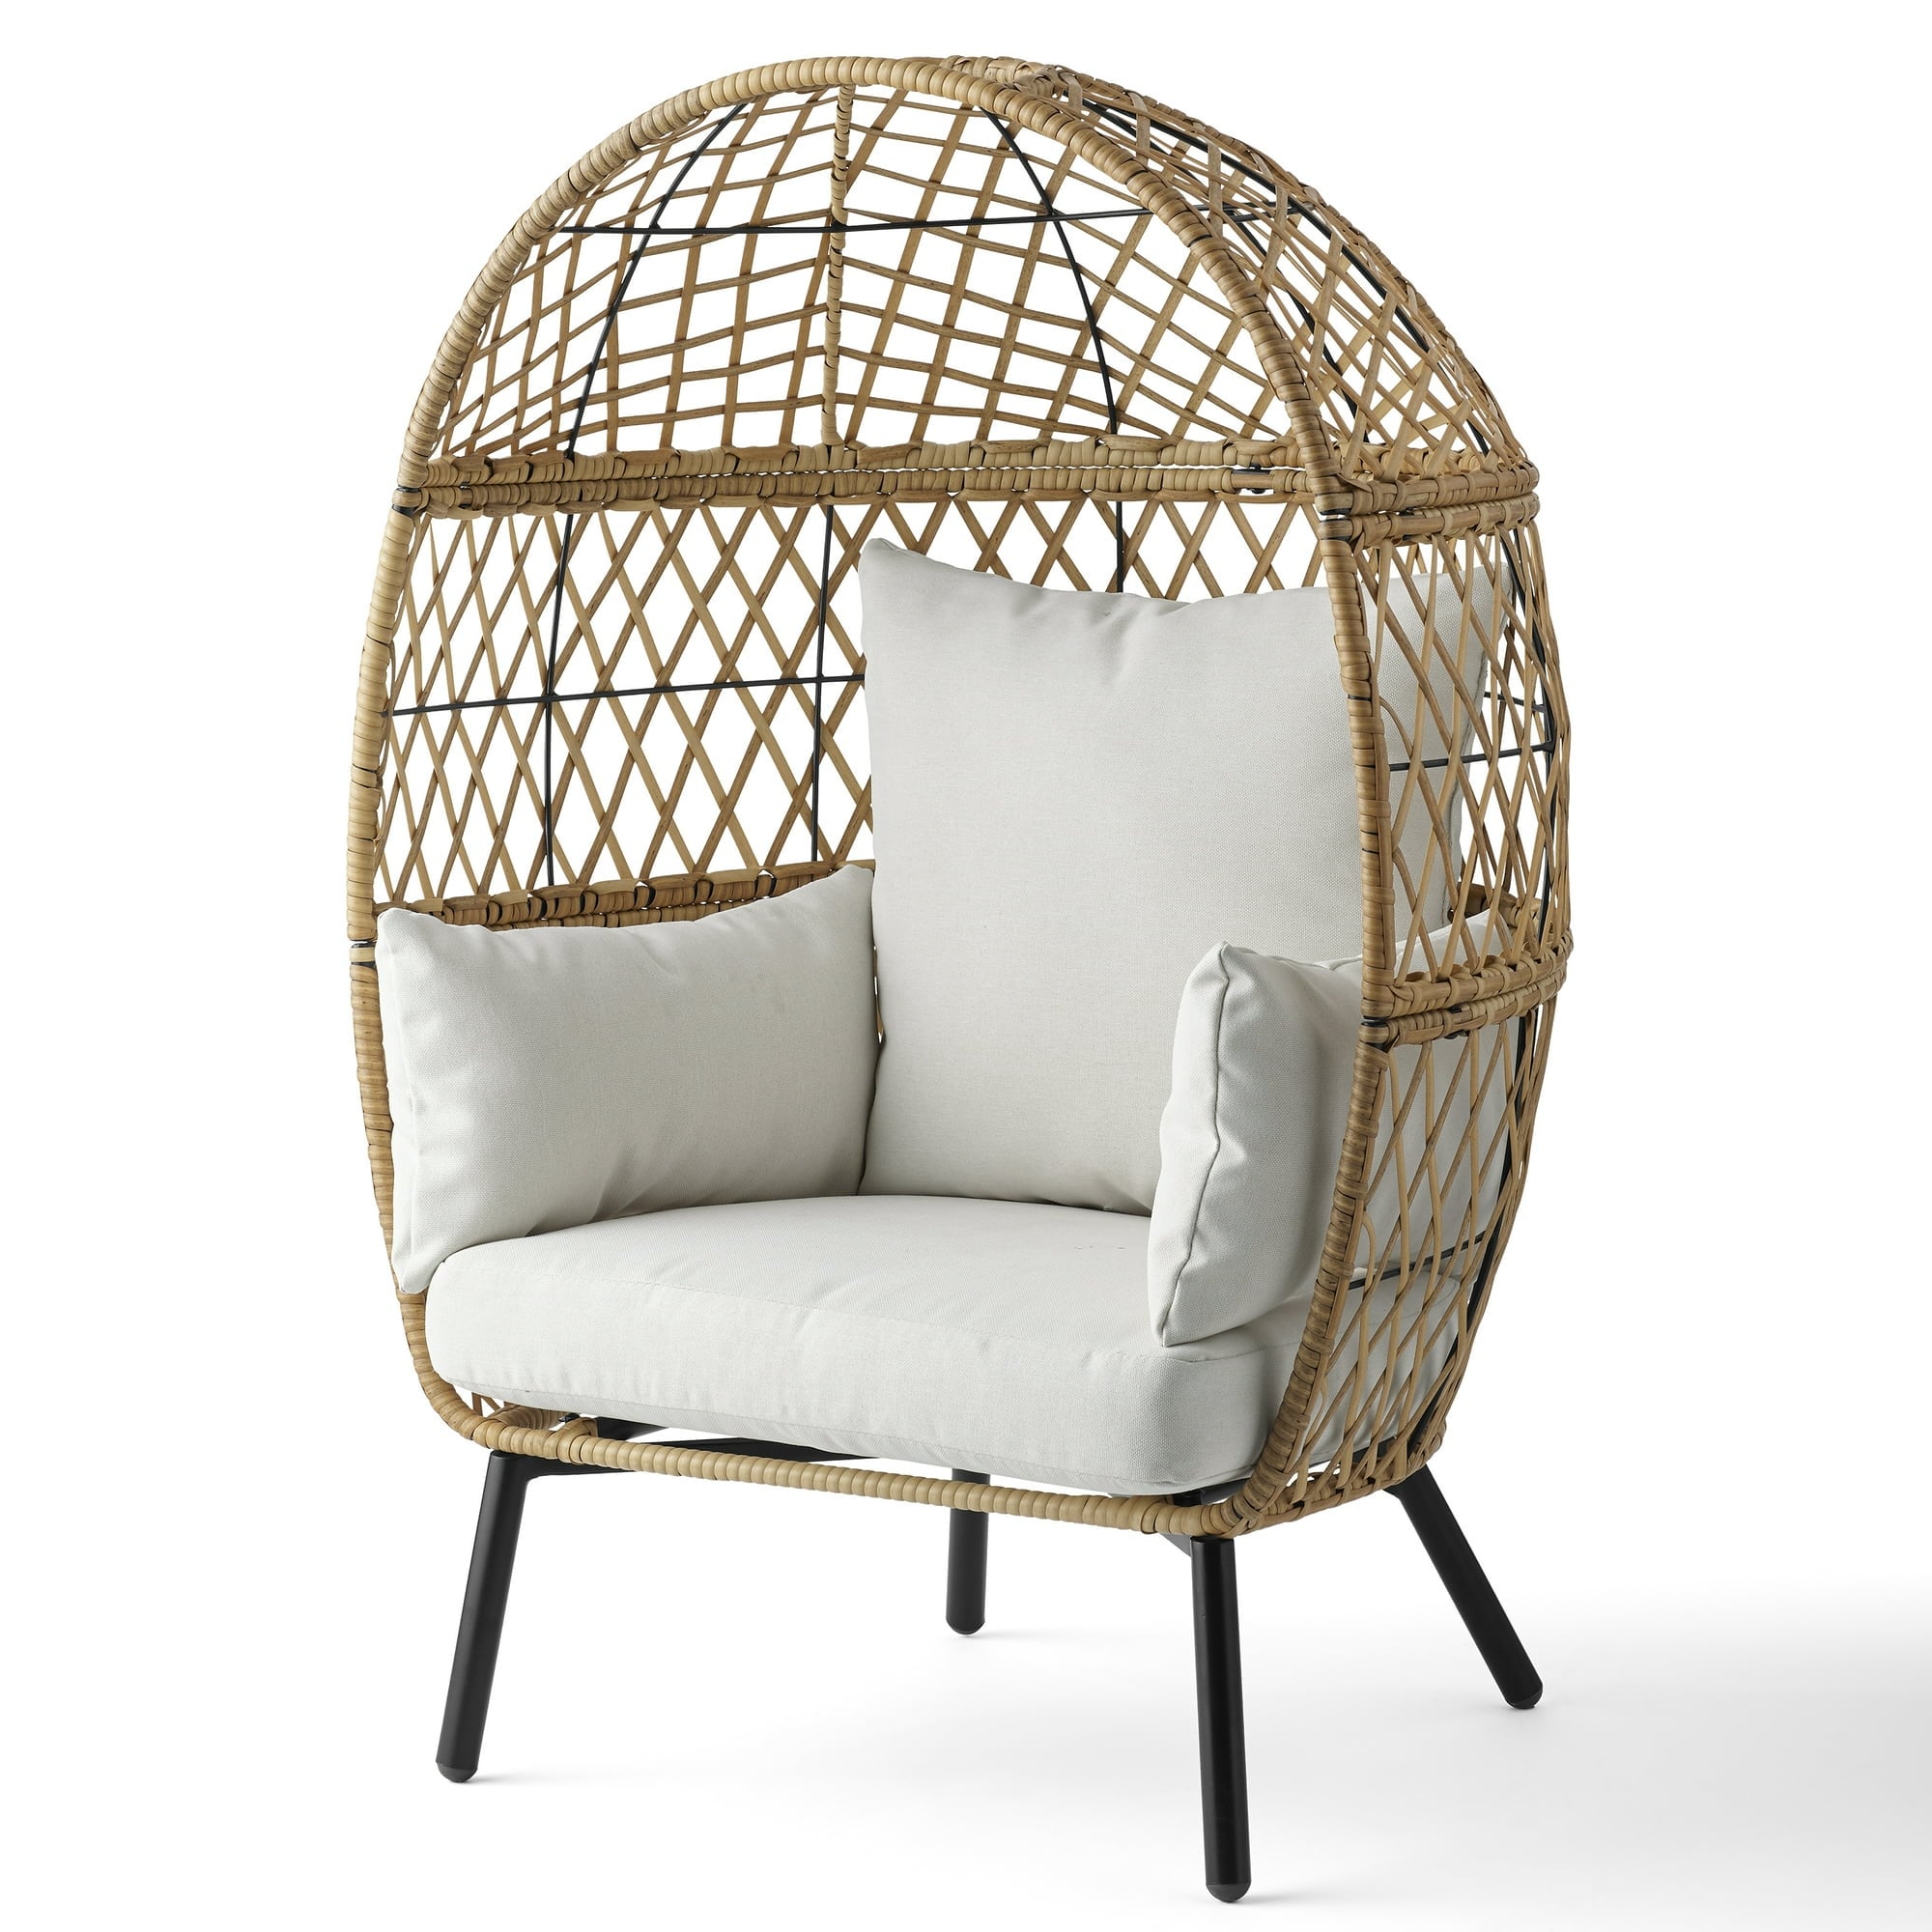 Kids Outdoor Wicker Stationary Egg Chair